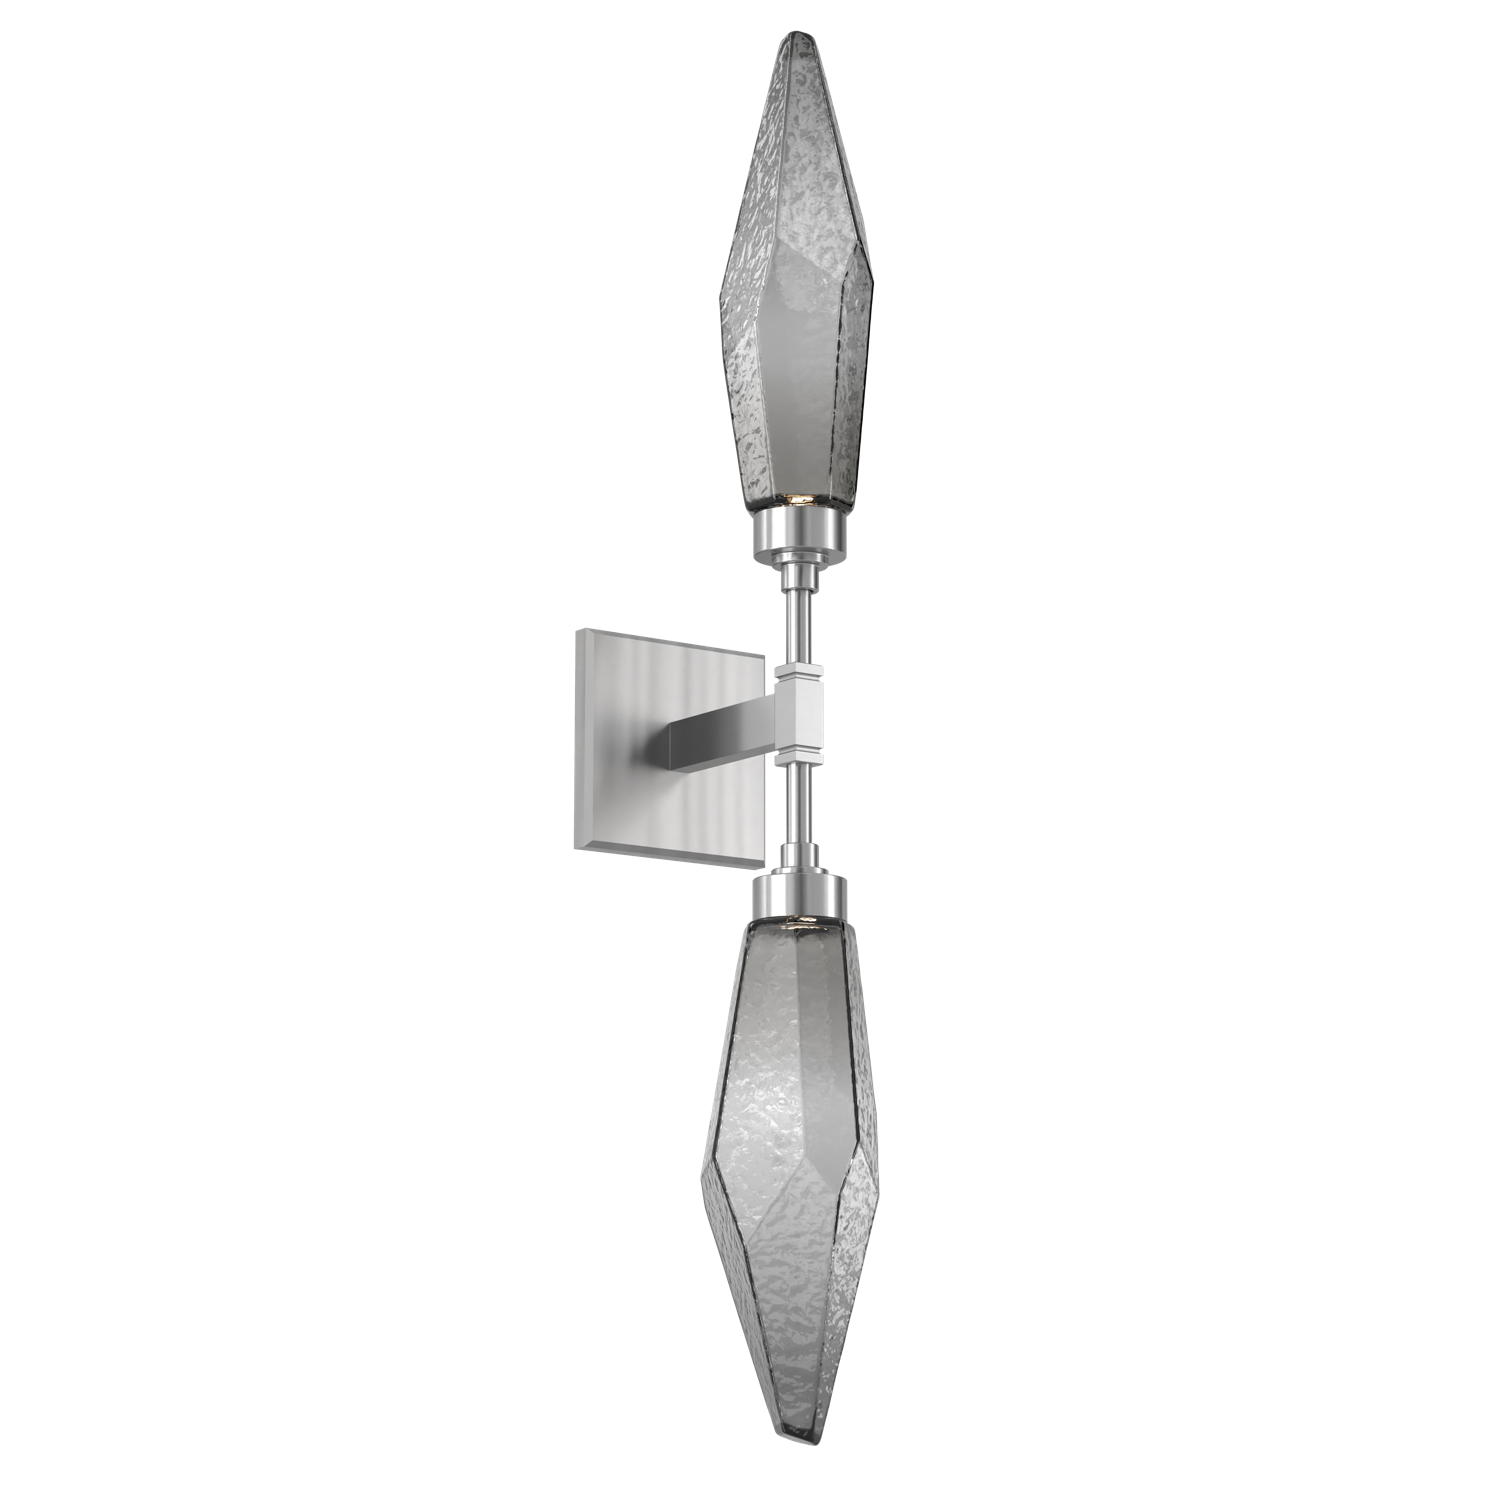 IDB0050-02-SN-CS-Hammerton-Studio-Rock-Crystal-wall-sconce-with-satin-nickel-finish-and-chilled-smoke-glass-shades-and-LED-lamping